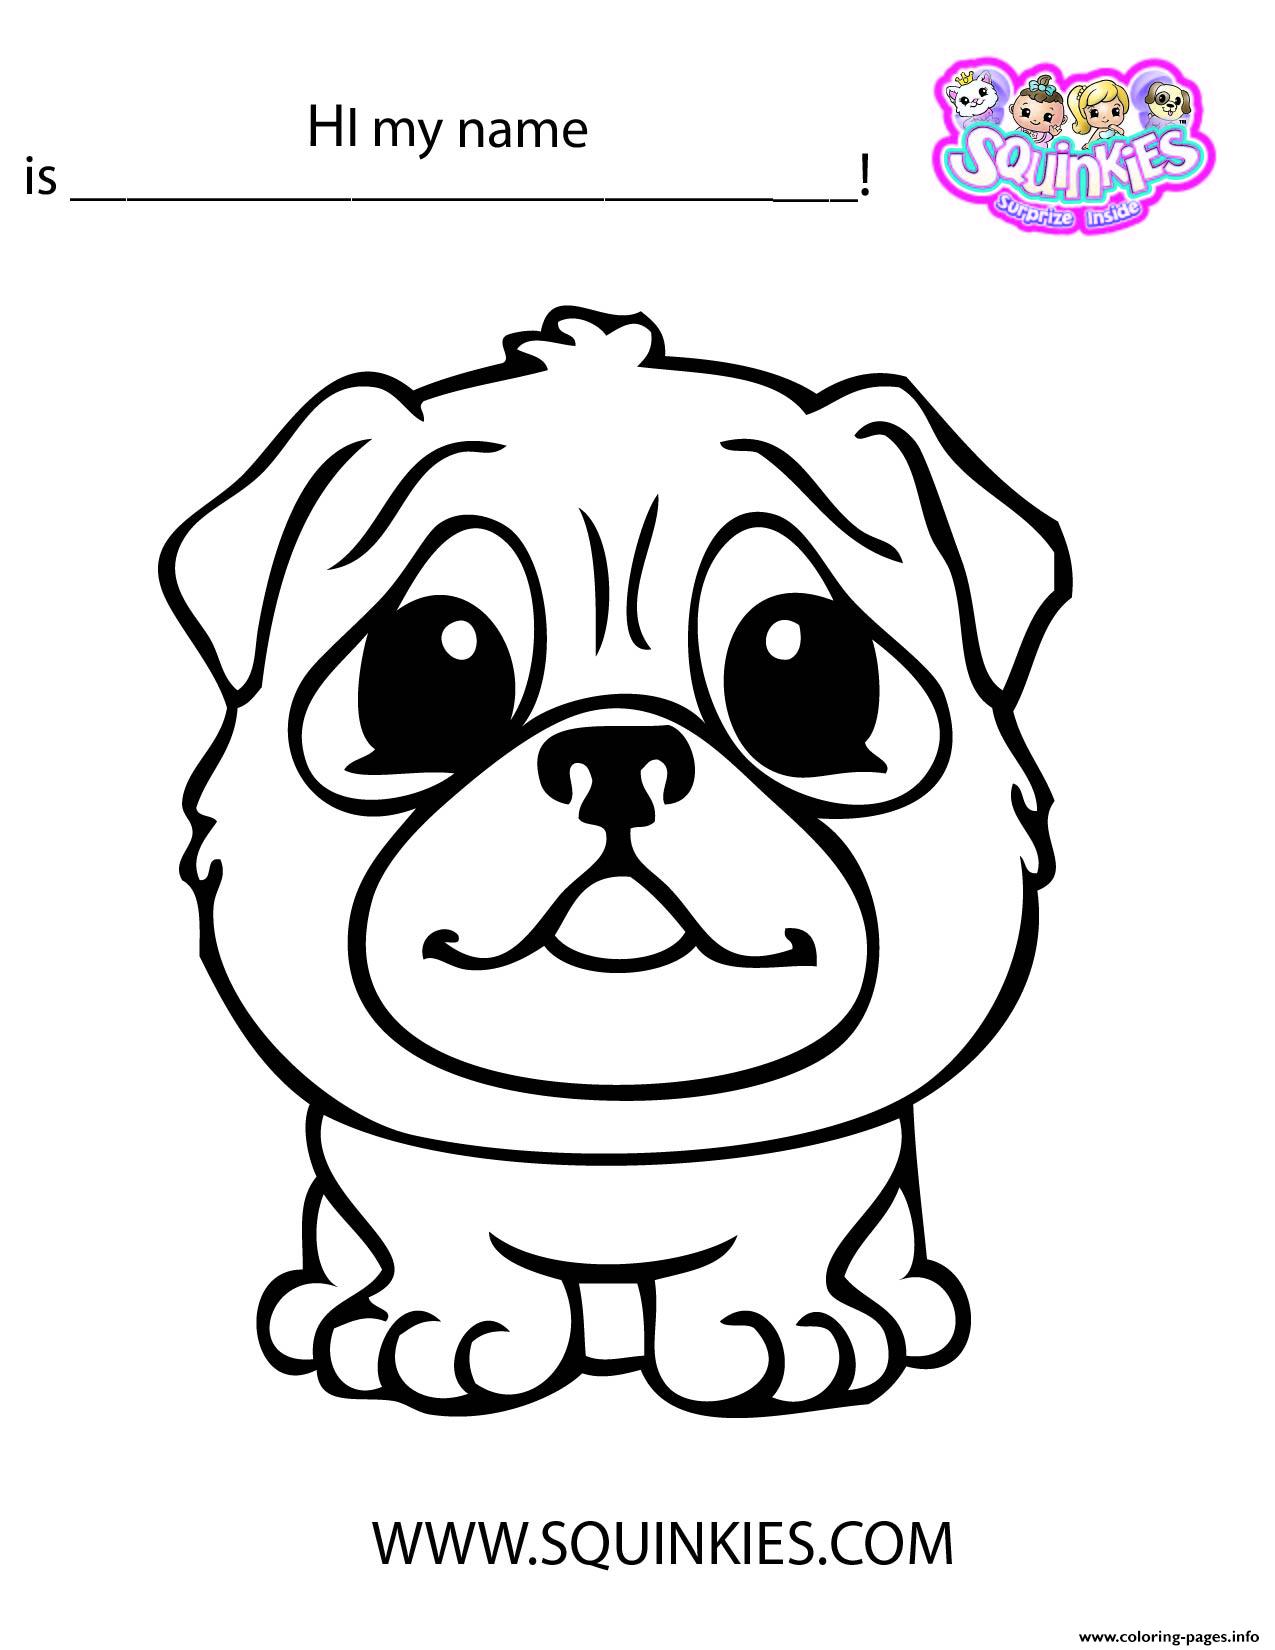 Cute Squinkies Dog coloring